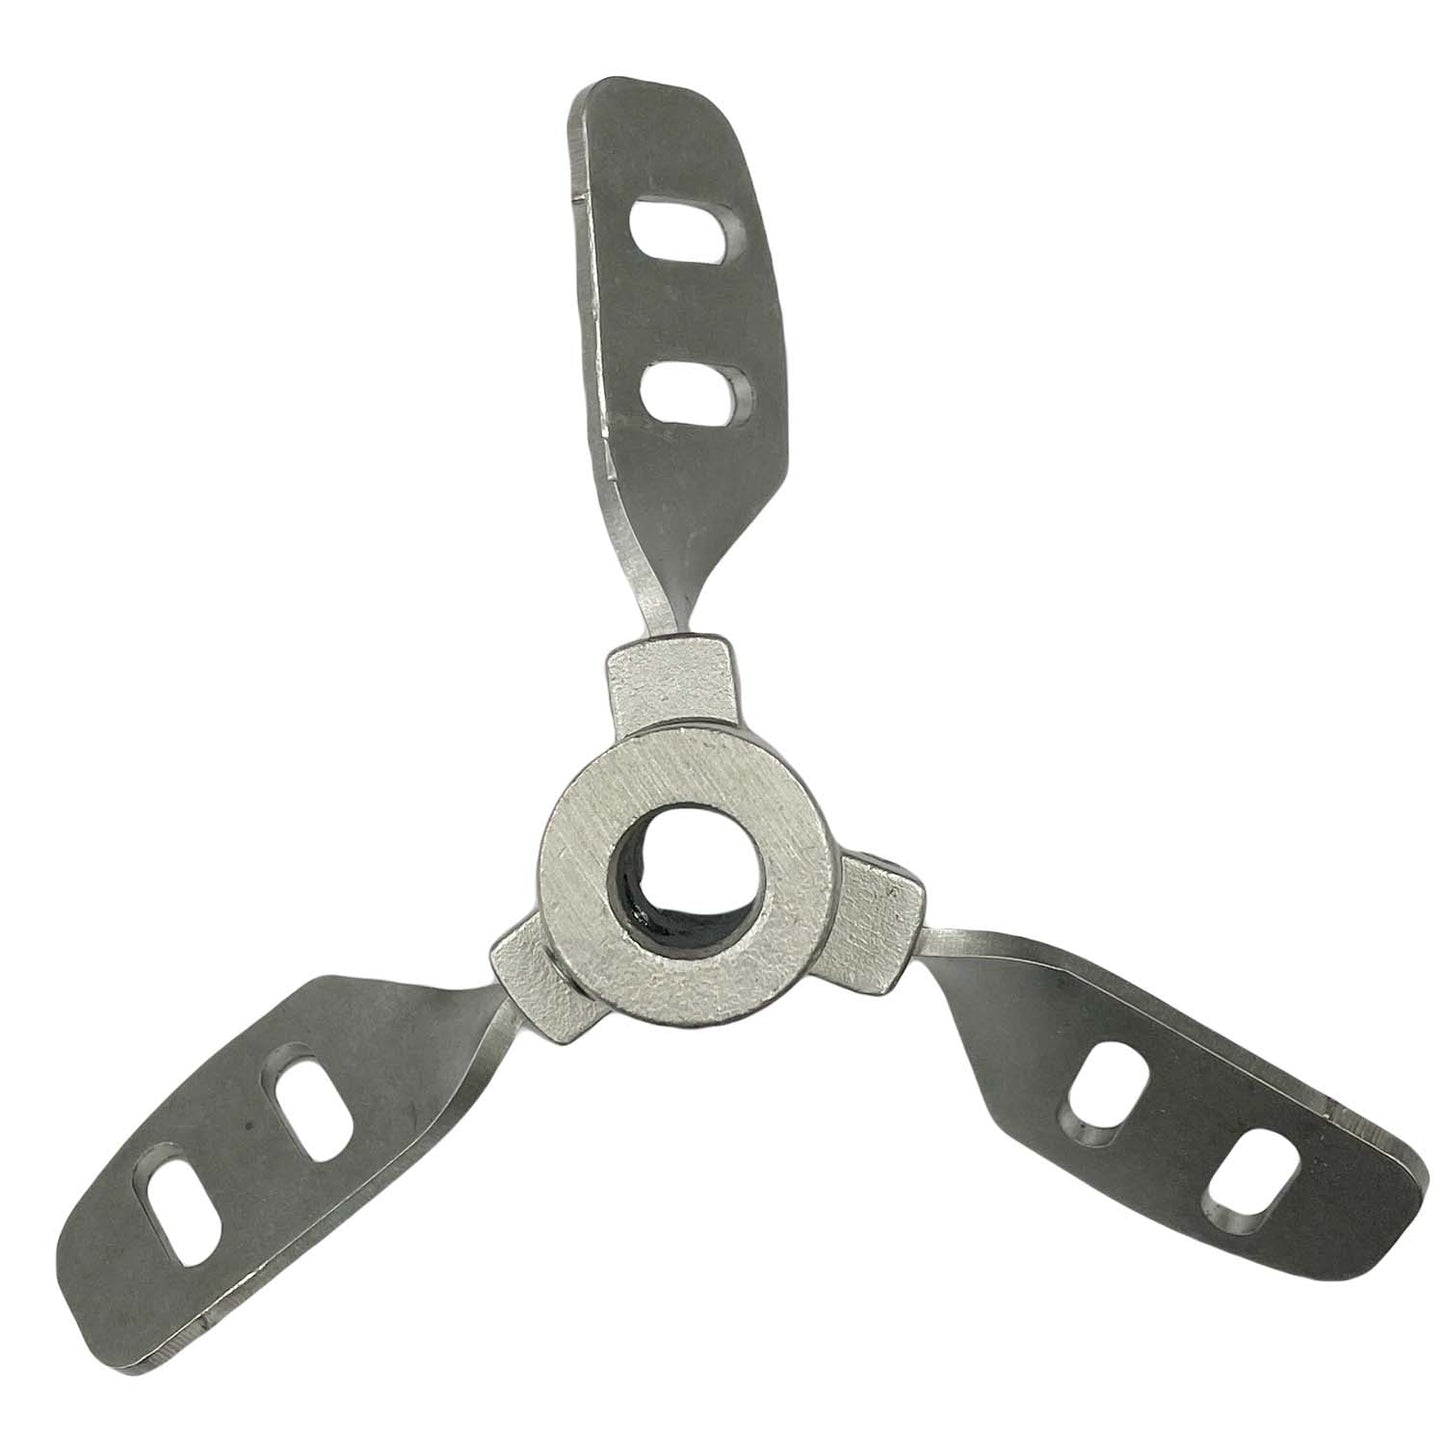 Cosmostar EX6S12 6 inches Expandable Stainless Steel Agitator Mixing Blade Compatible with 0.47” /12mm Shaft